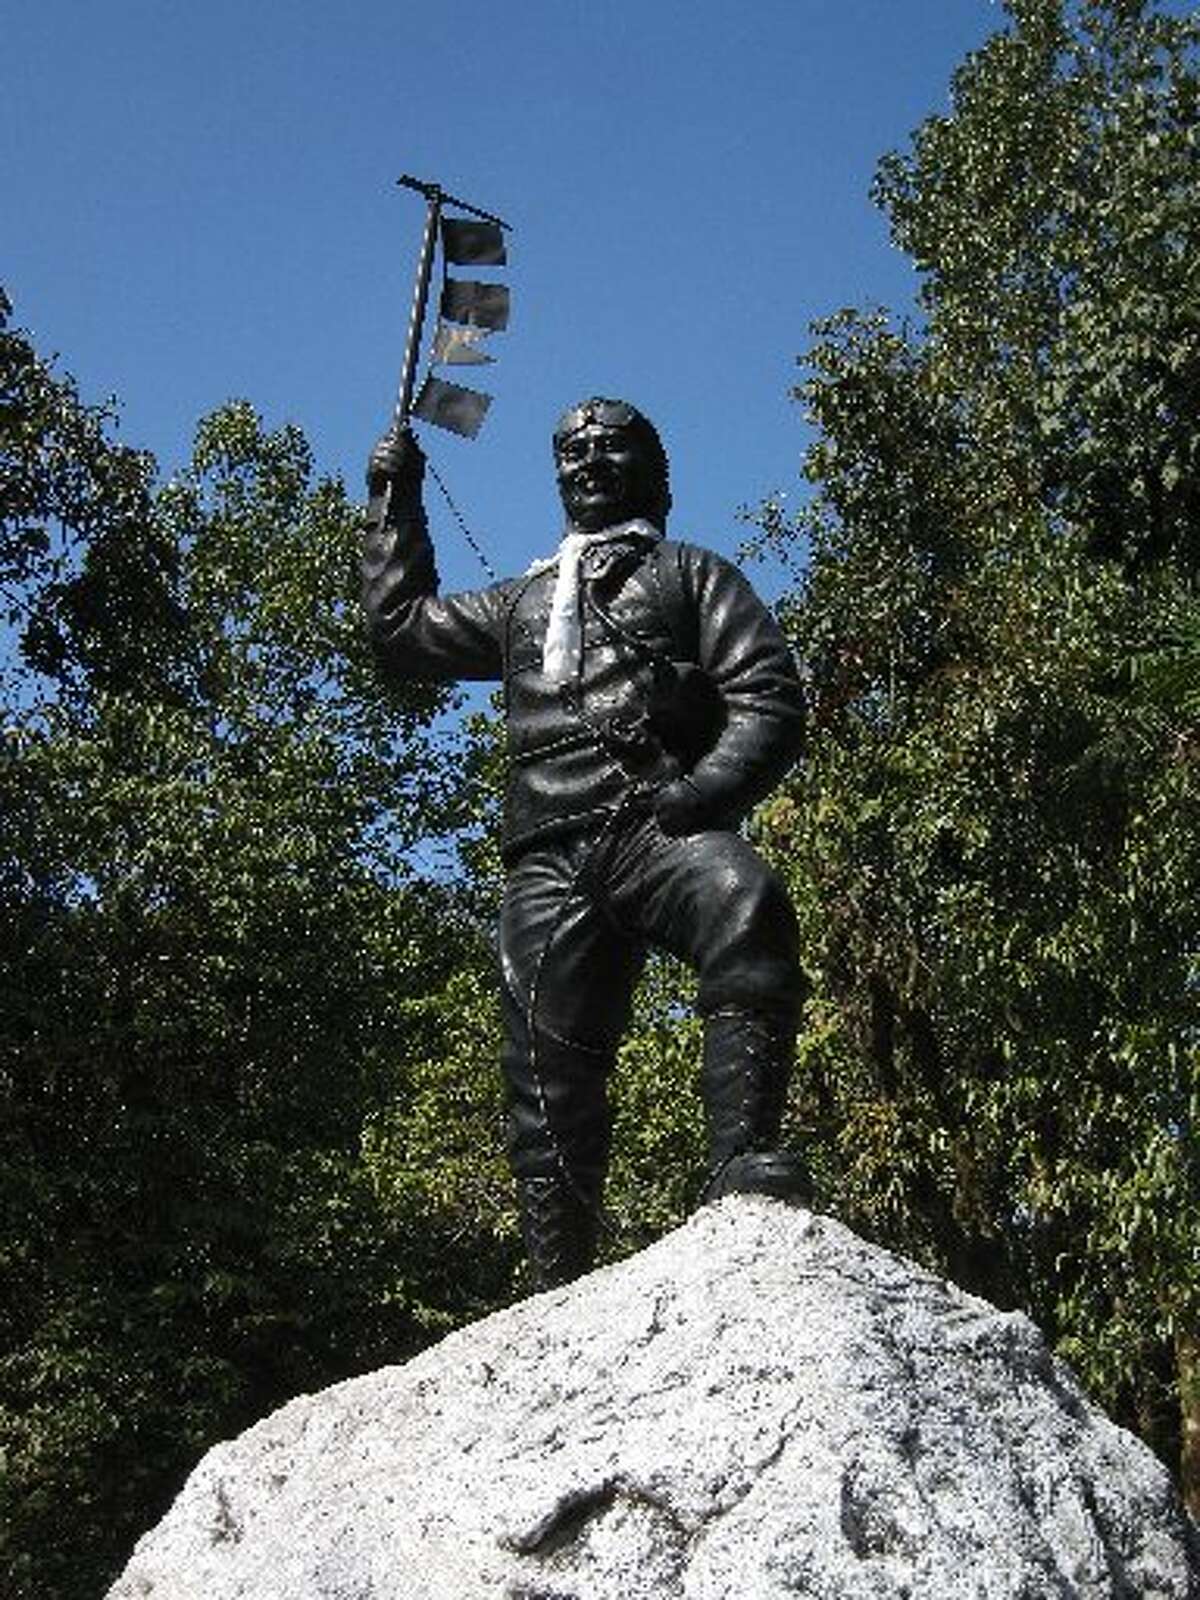 Statue of Tenzing Norgay over his cremated remains in the Himalayas